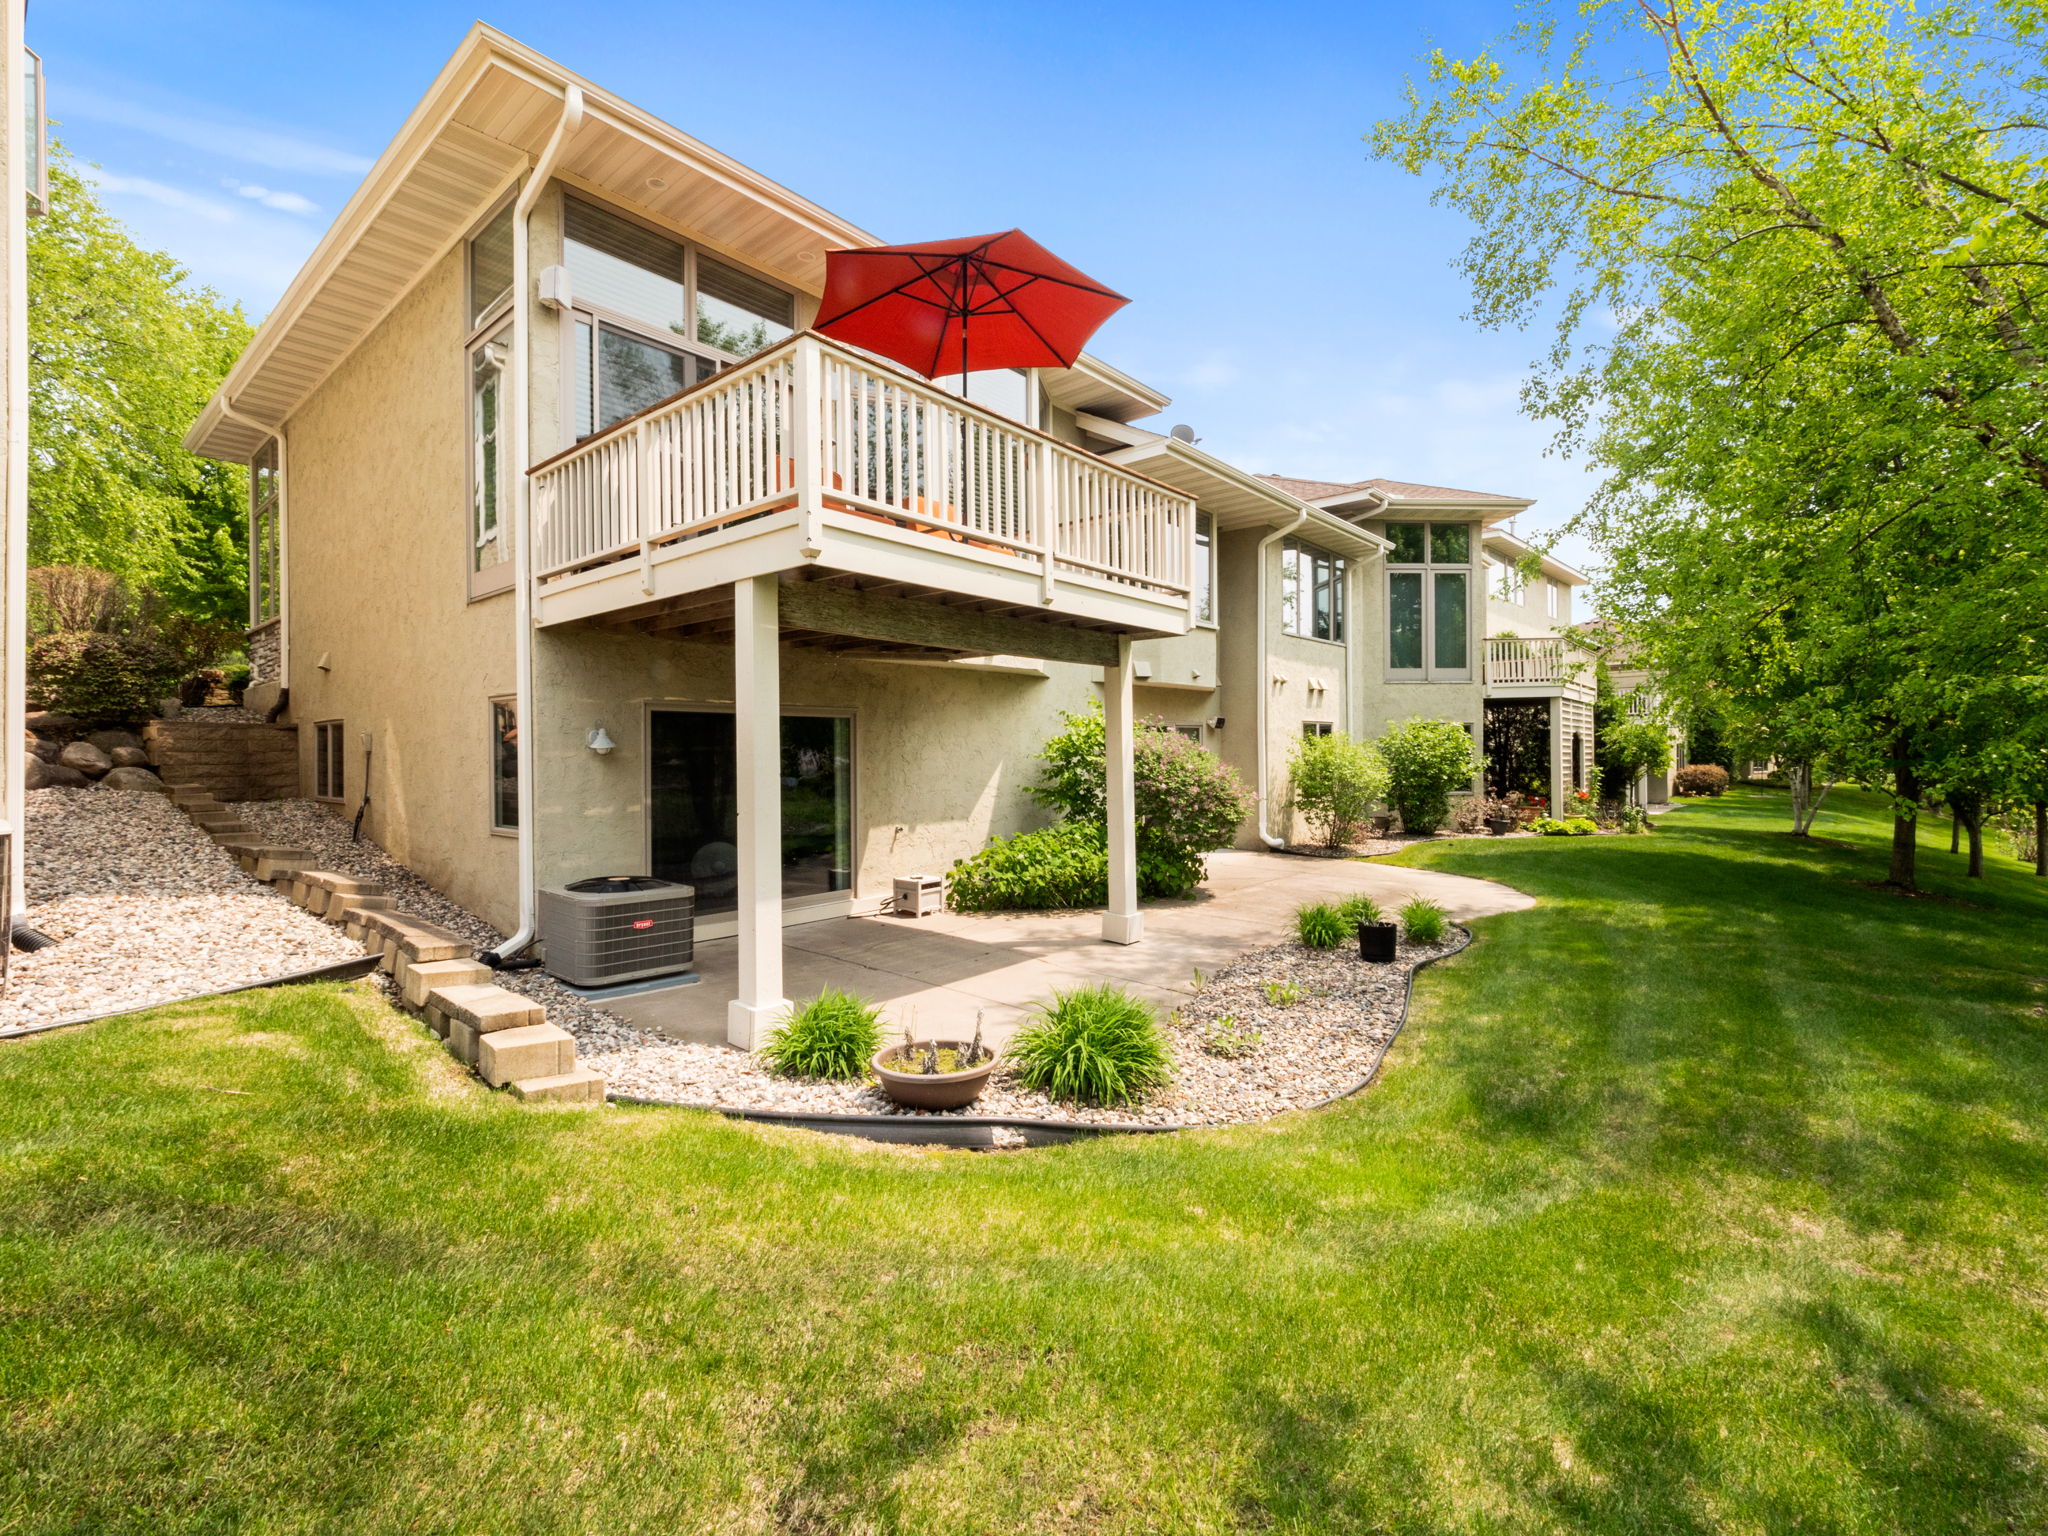  Waterford Drive, Golden Valley, MN 55422, US Photo 44